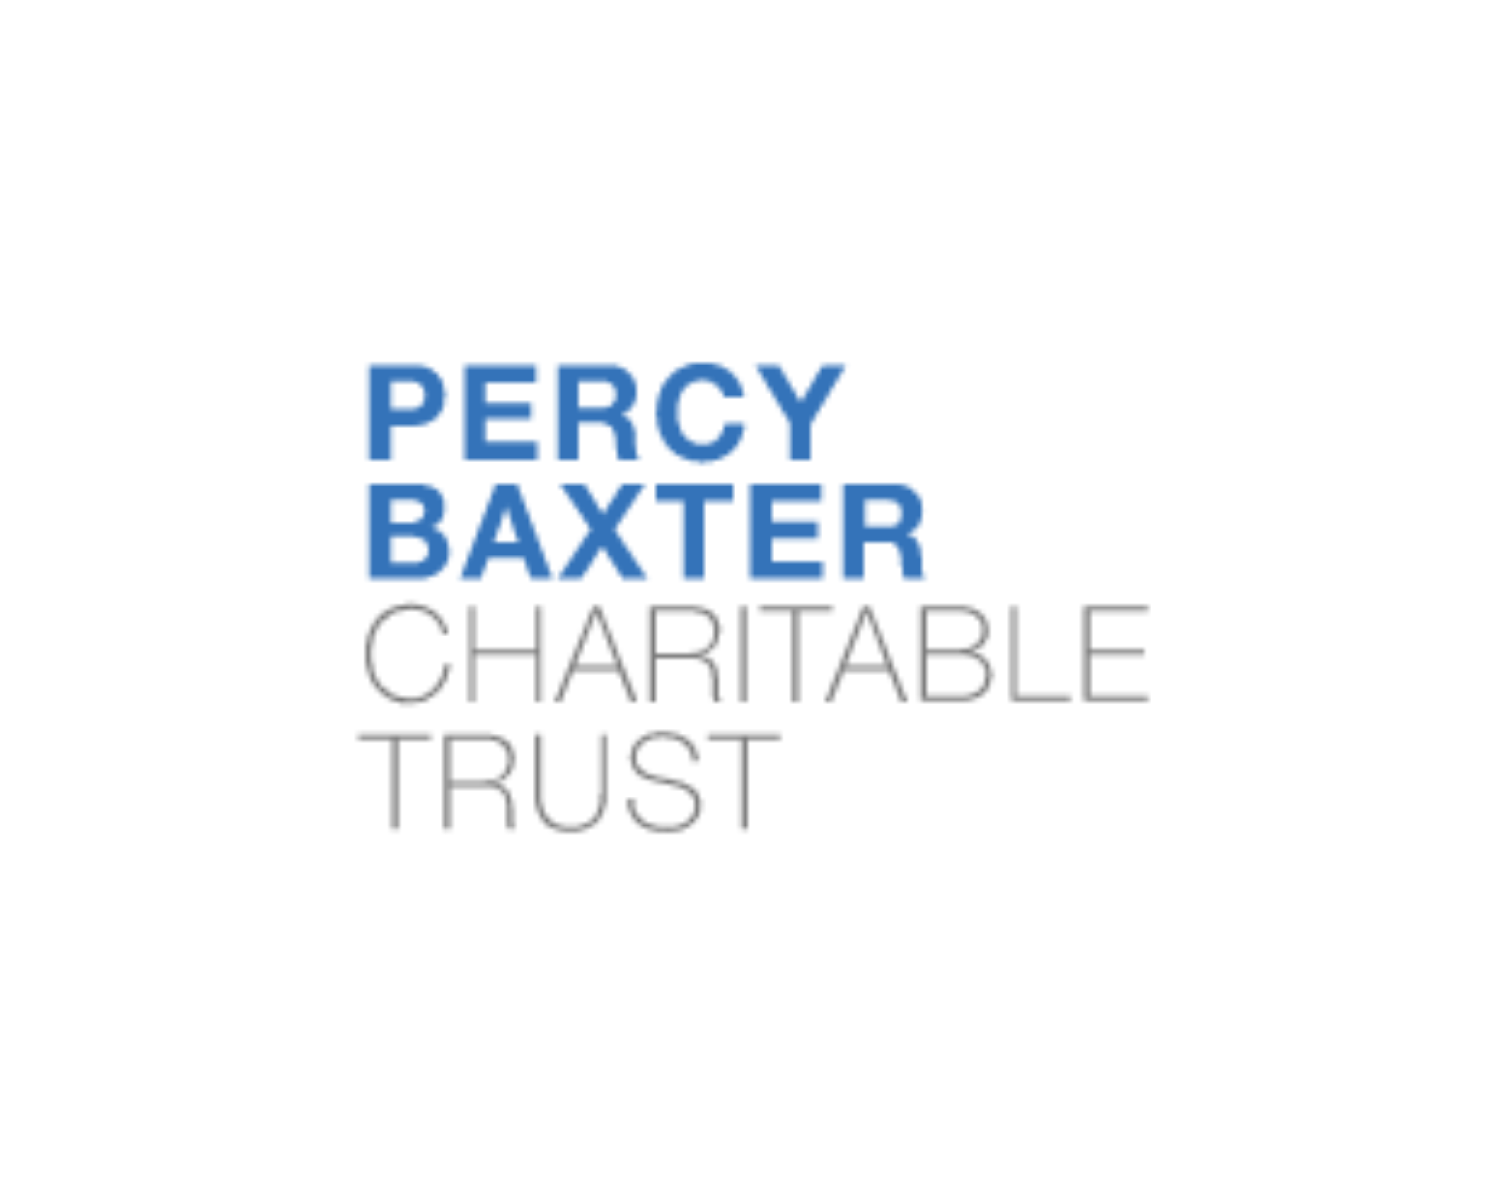 Percy Baxter Charitable Trust